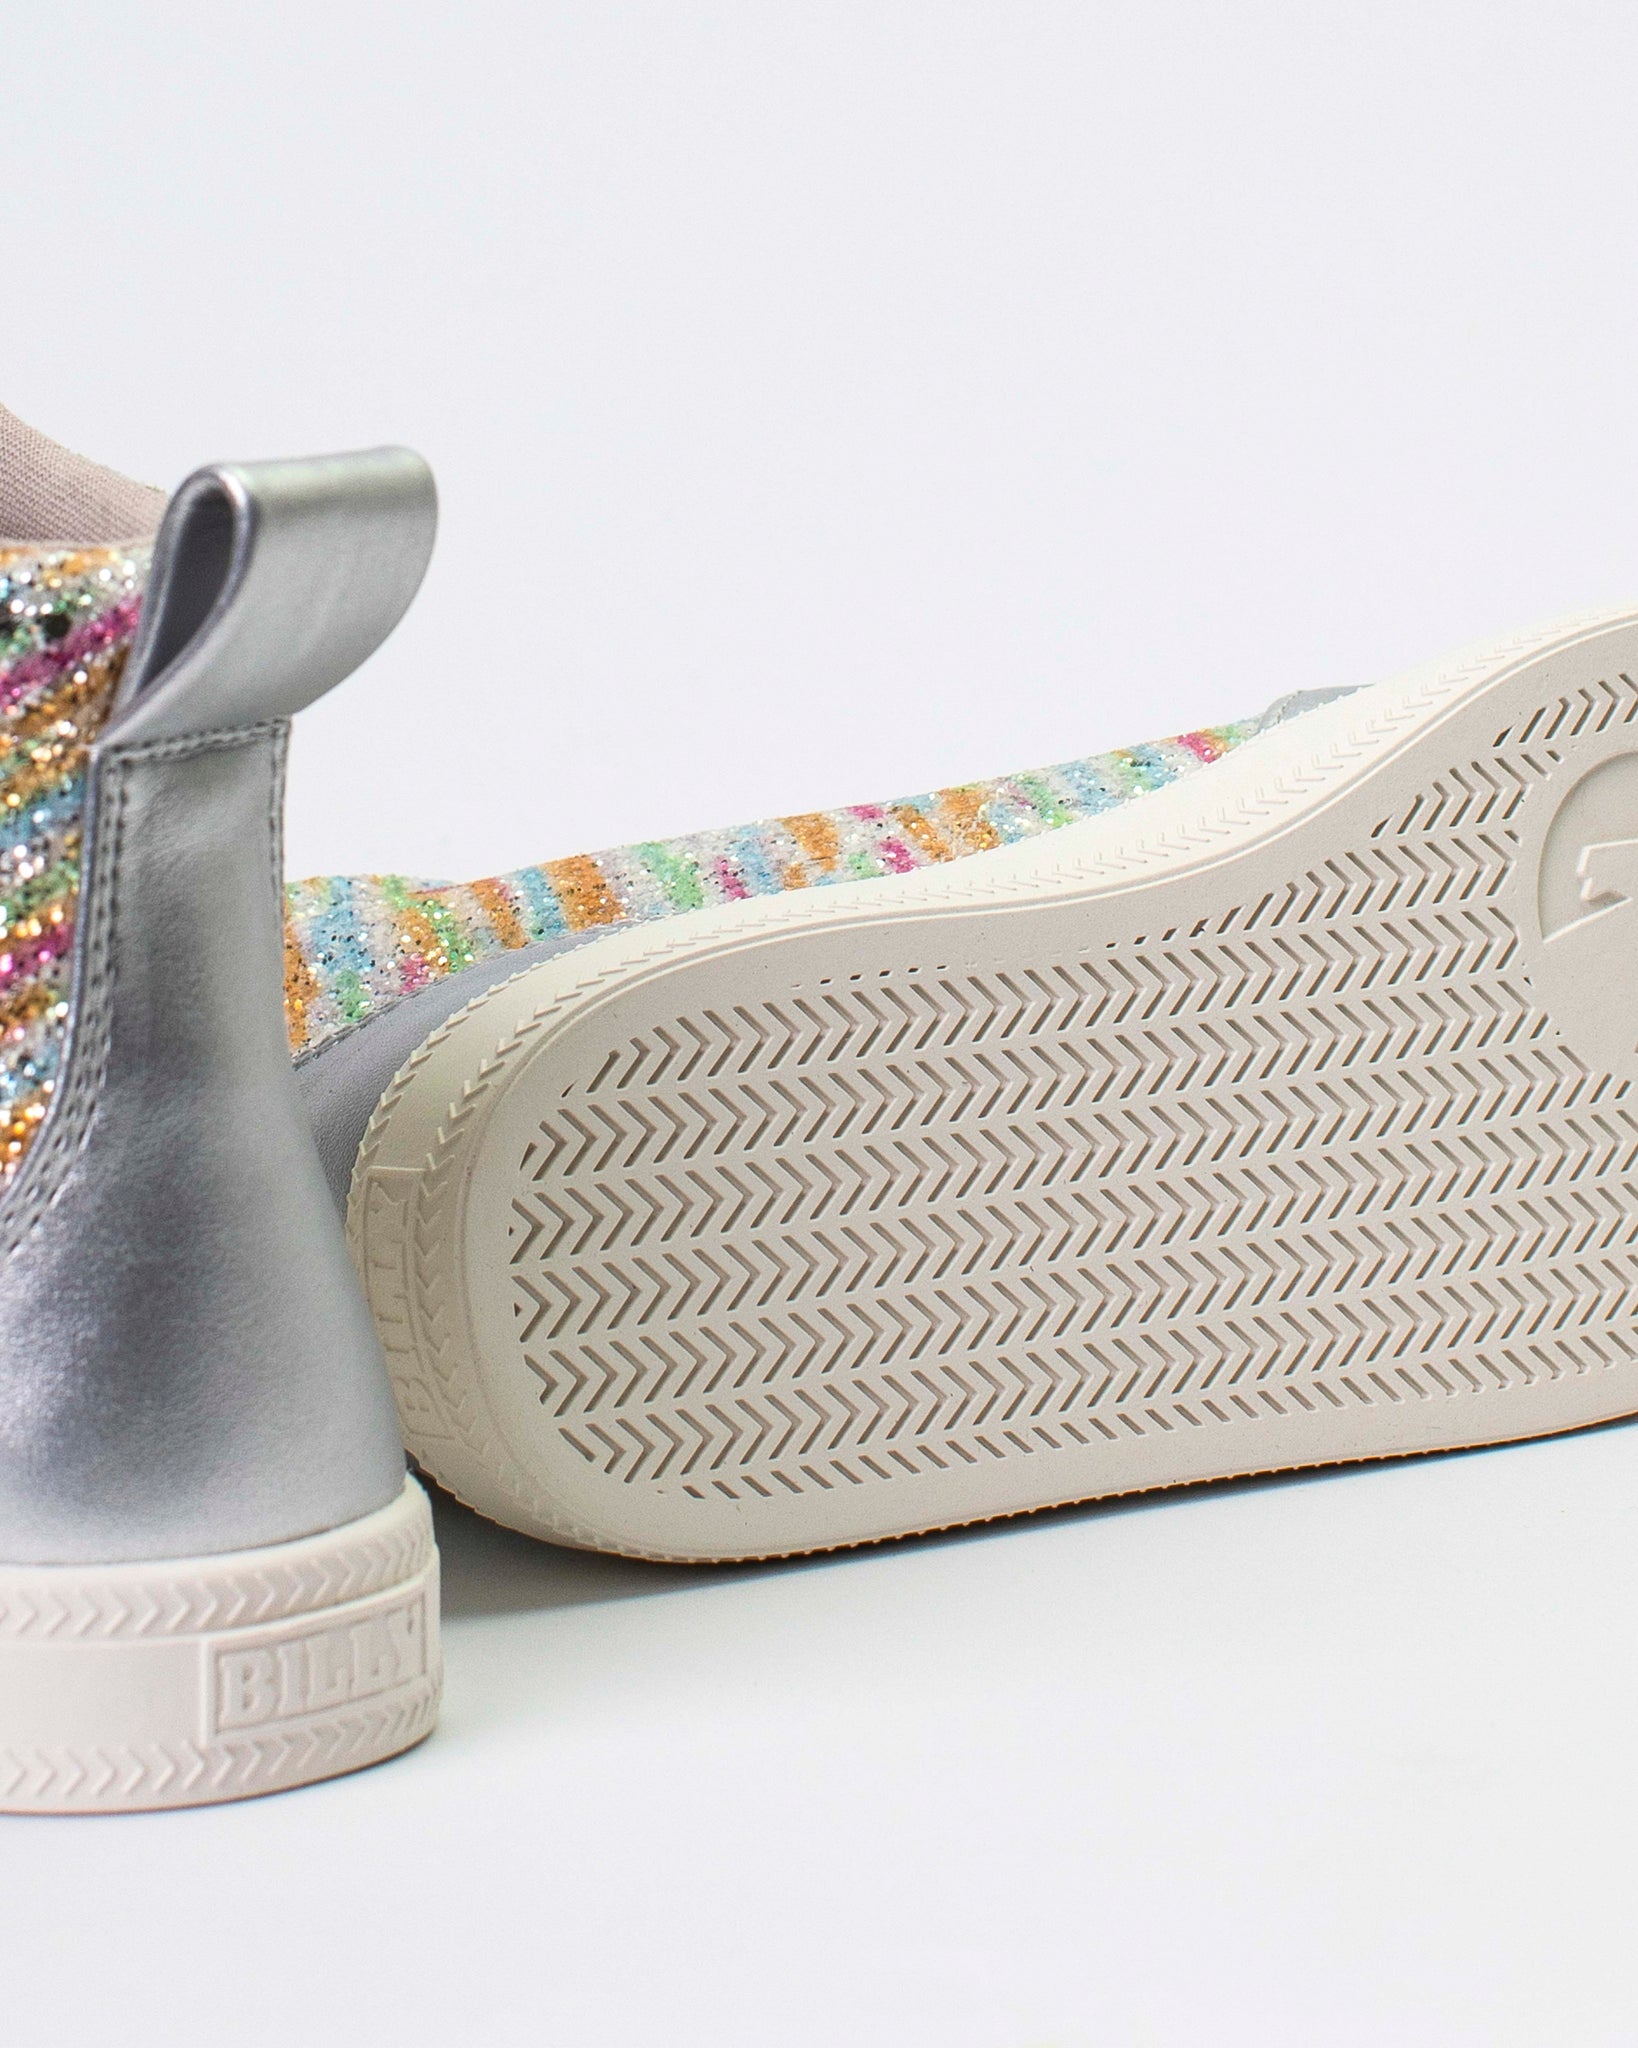 Classic High Top (Toddler) - Silver Rainbow